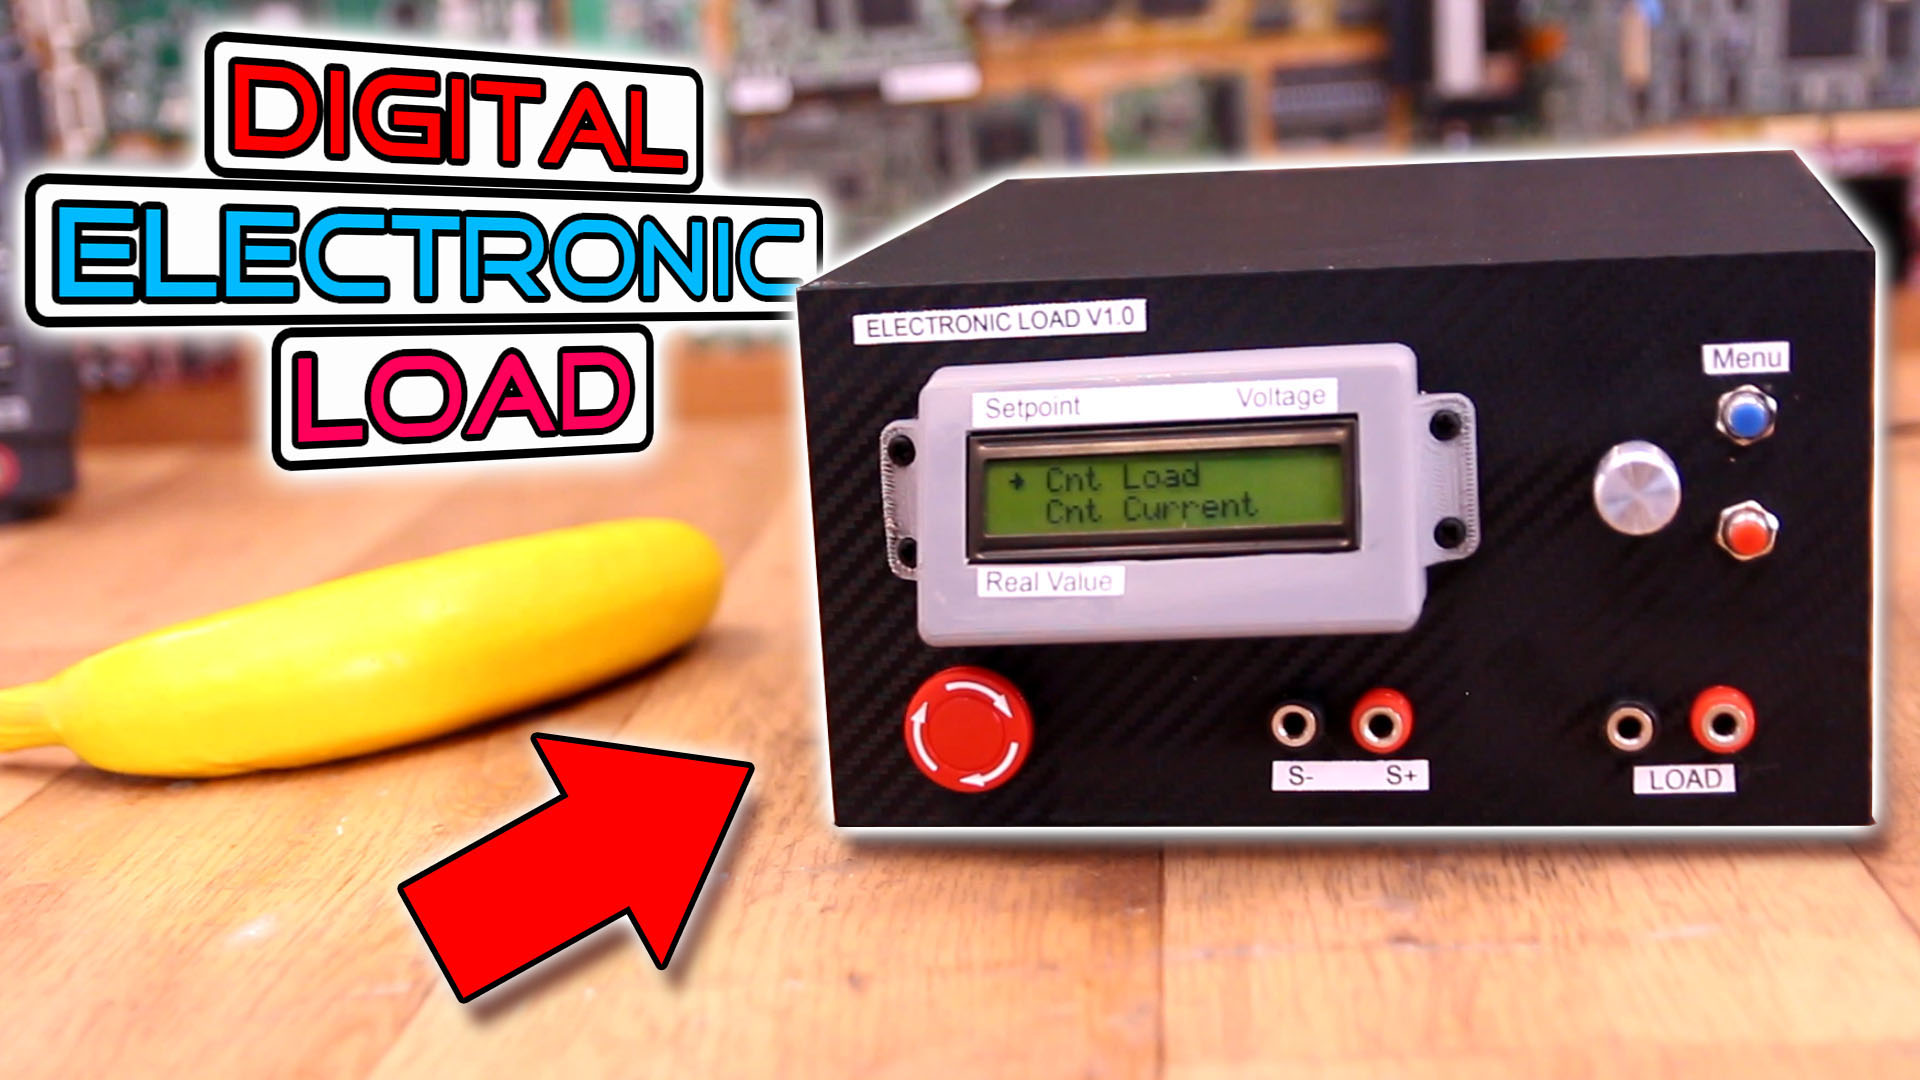  In this tutorial I show you how I've build a homemade electronic load with Arduino, an LCD, rotary encoder for the menu and a power MSOFET for load c